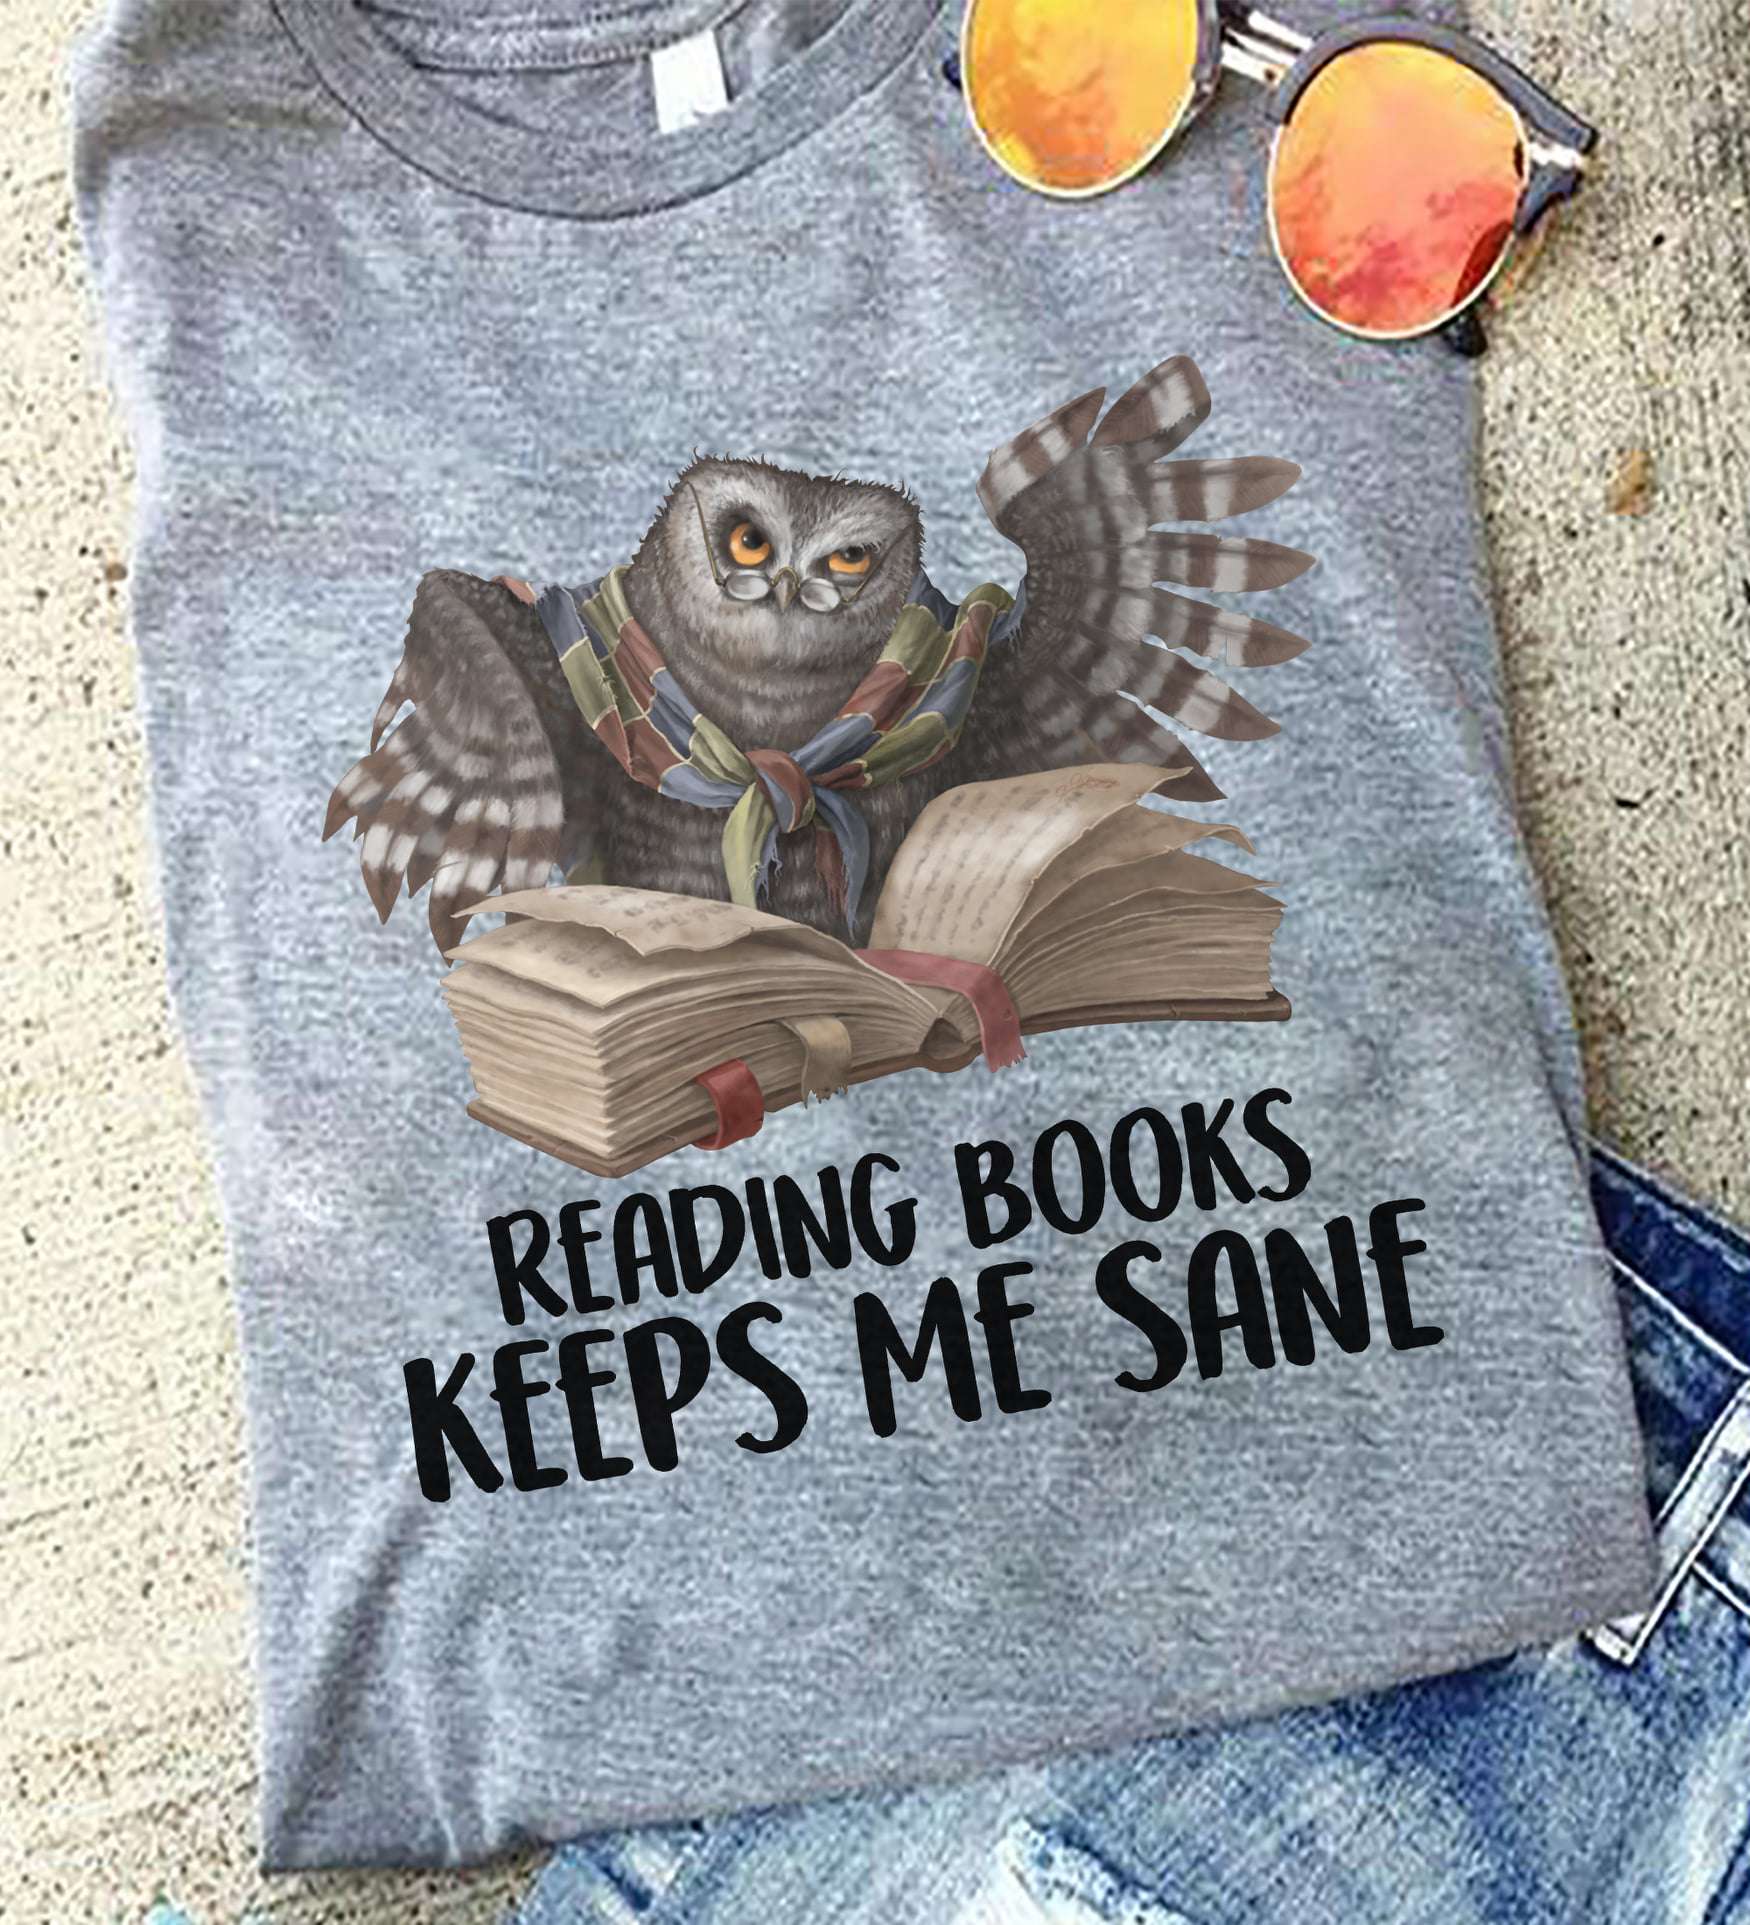 Old Owl Read Book - Reading books keeps me sane